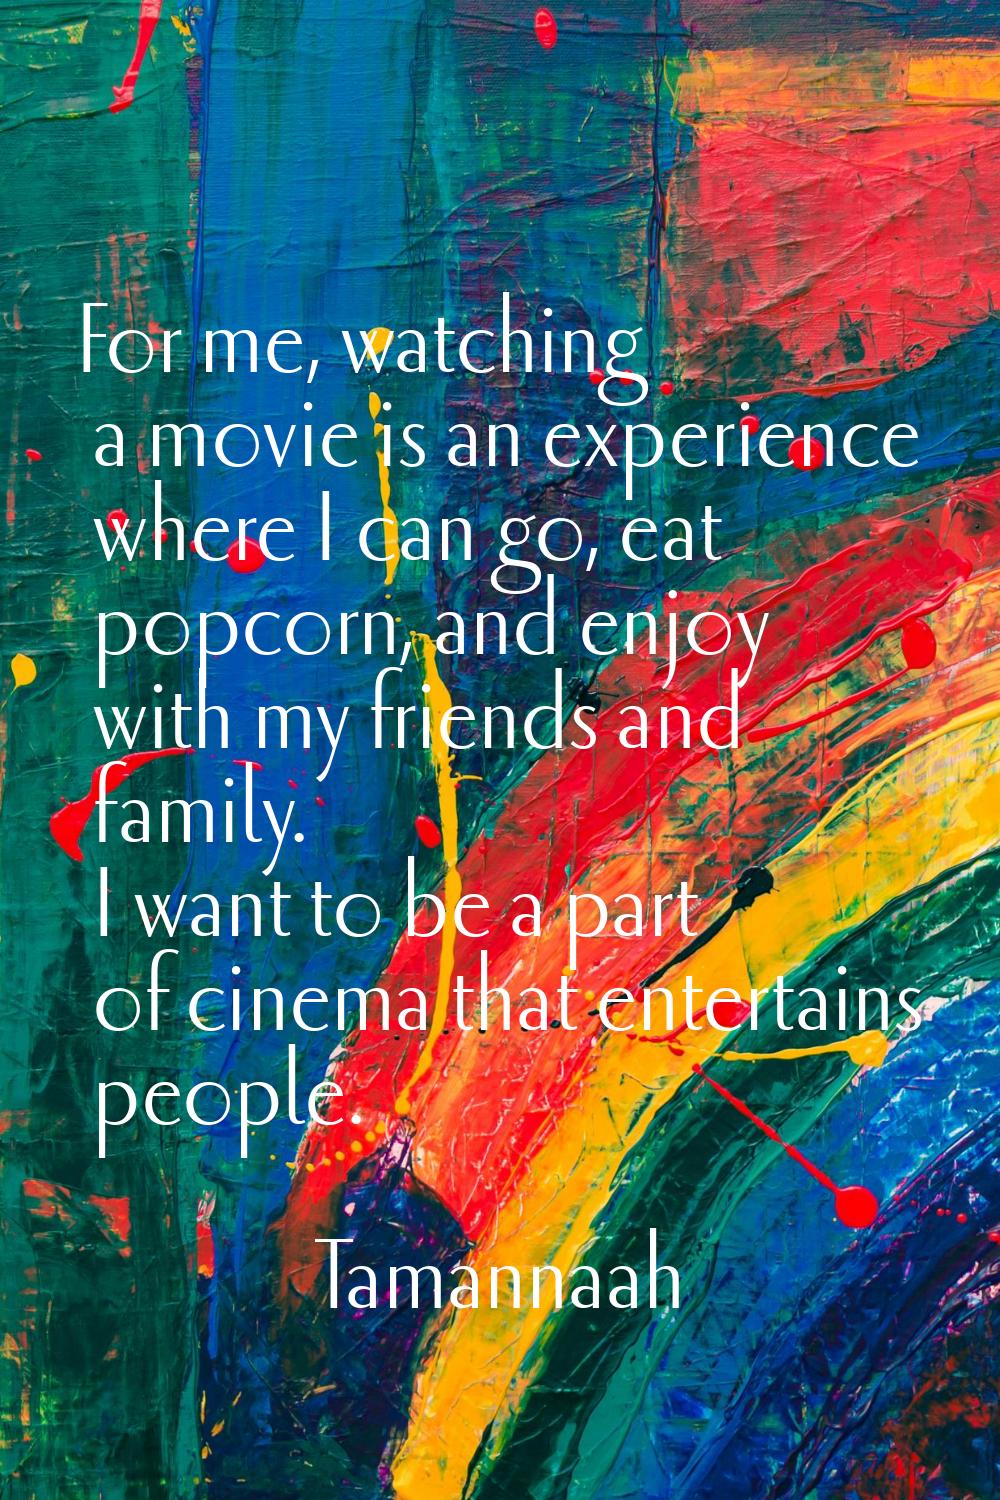 For me, watching a movie is an experience where I can go, eat popcorn, and enjoy with my friends an